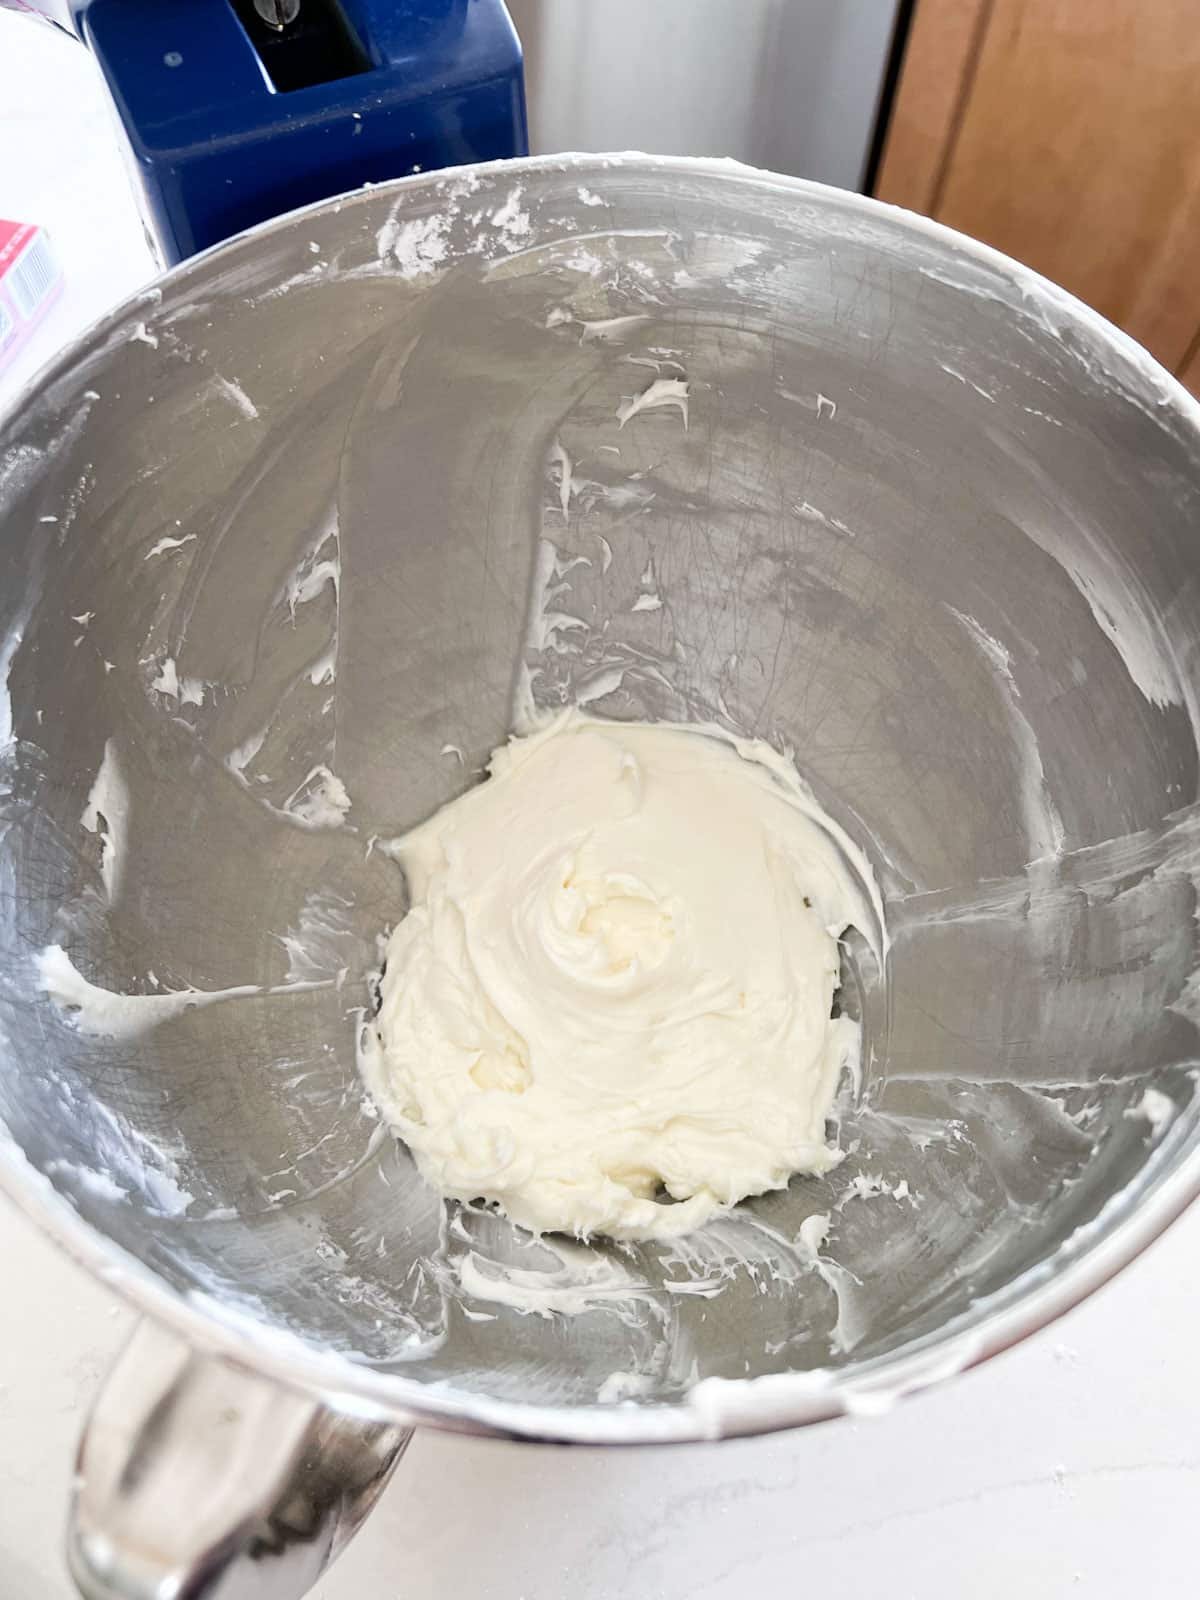 The cream cheese mixture whipped together and well combined in the stand mixer bowl.